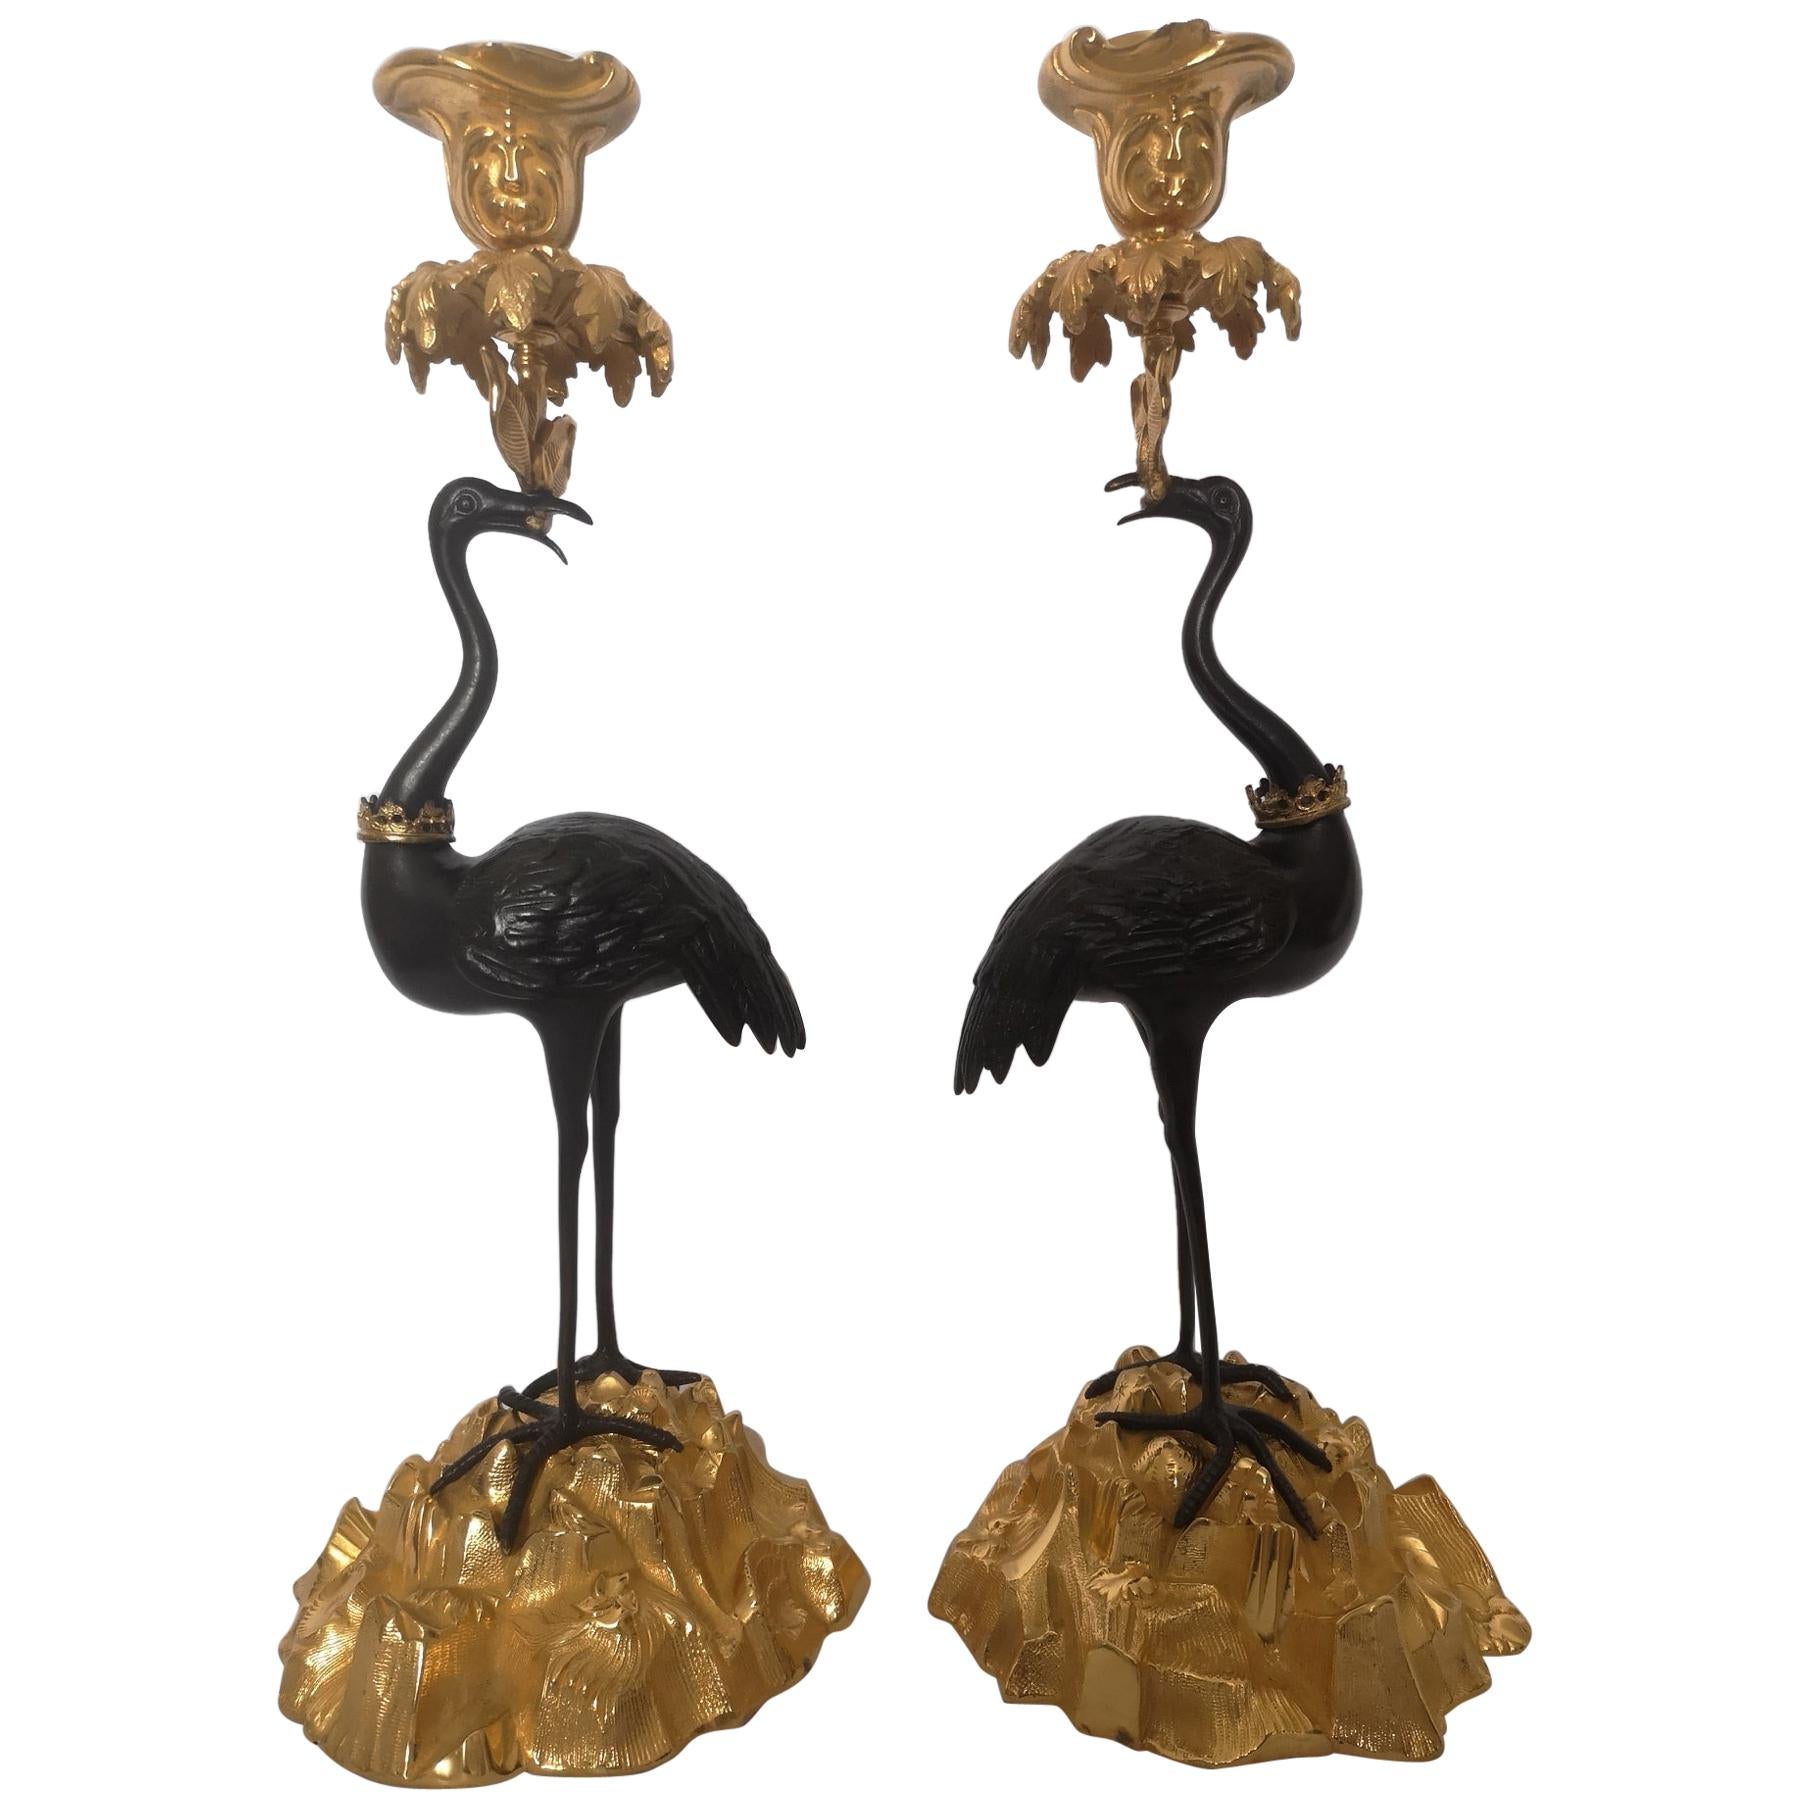 Pair of Early 19th Century English Bronze and Gilt Stork Candlesticks by Abbot For Sale